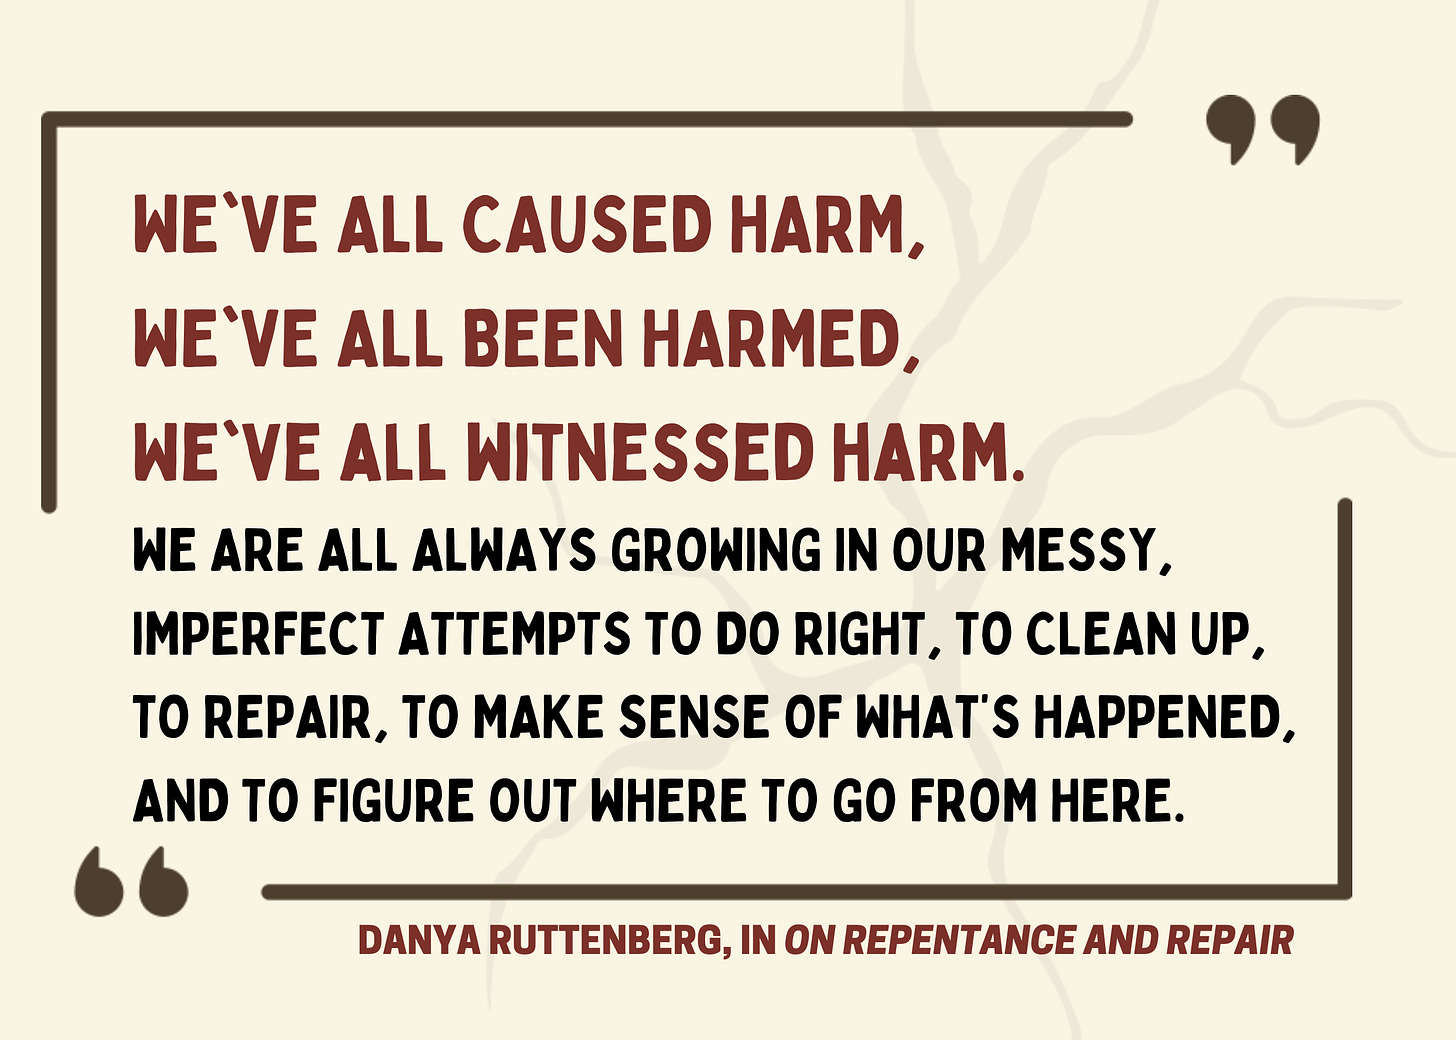 We've all caused harm. We've all been harmed. We've all witnessed harm. We are all always growing in our messy, imperfect attempts to do right, to clean up, to repair, to make sense of what's happened, and to figure out where to go from here. Danya Ruttenberg, On Repentance and Repair